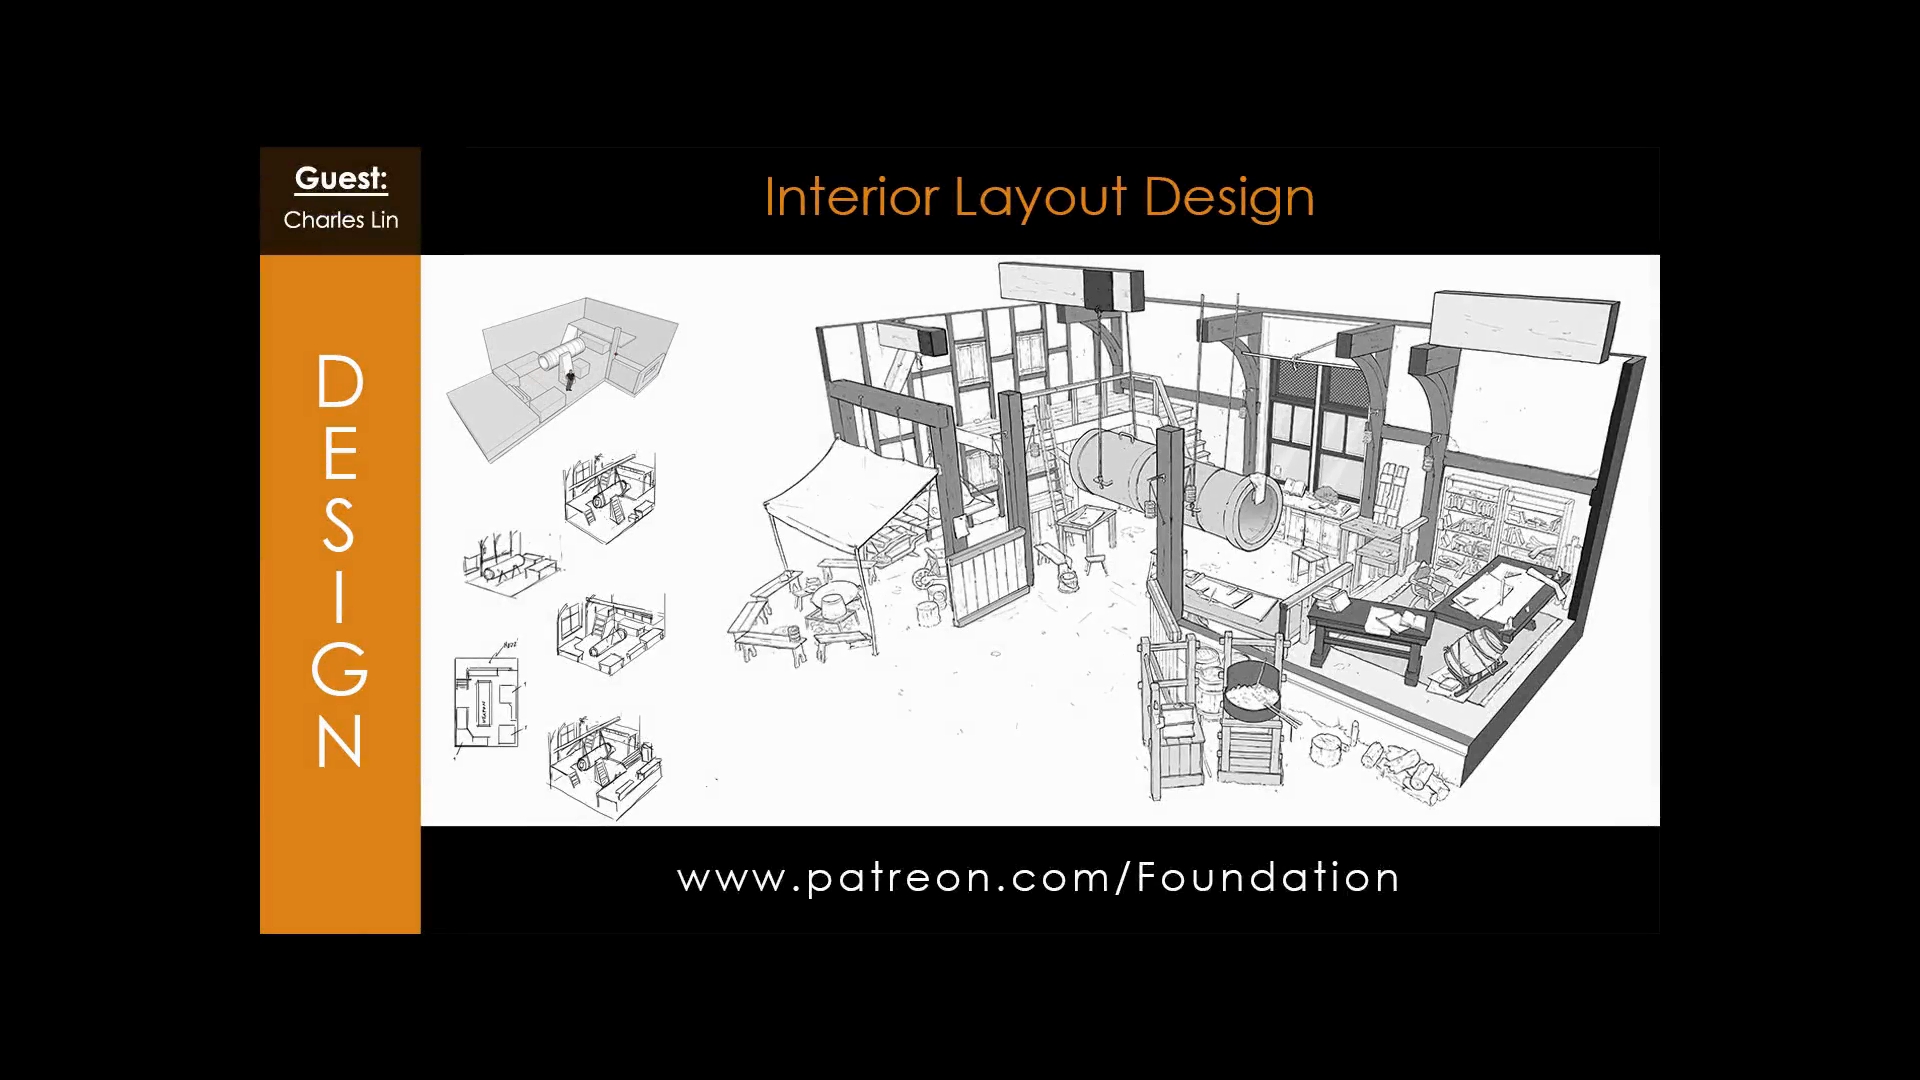 Interior Layout Design with Charles Lin